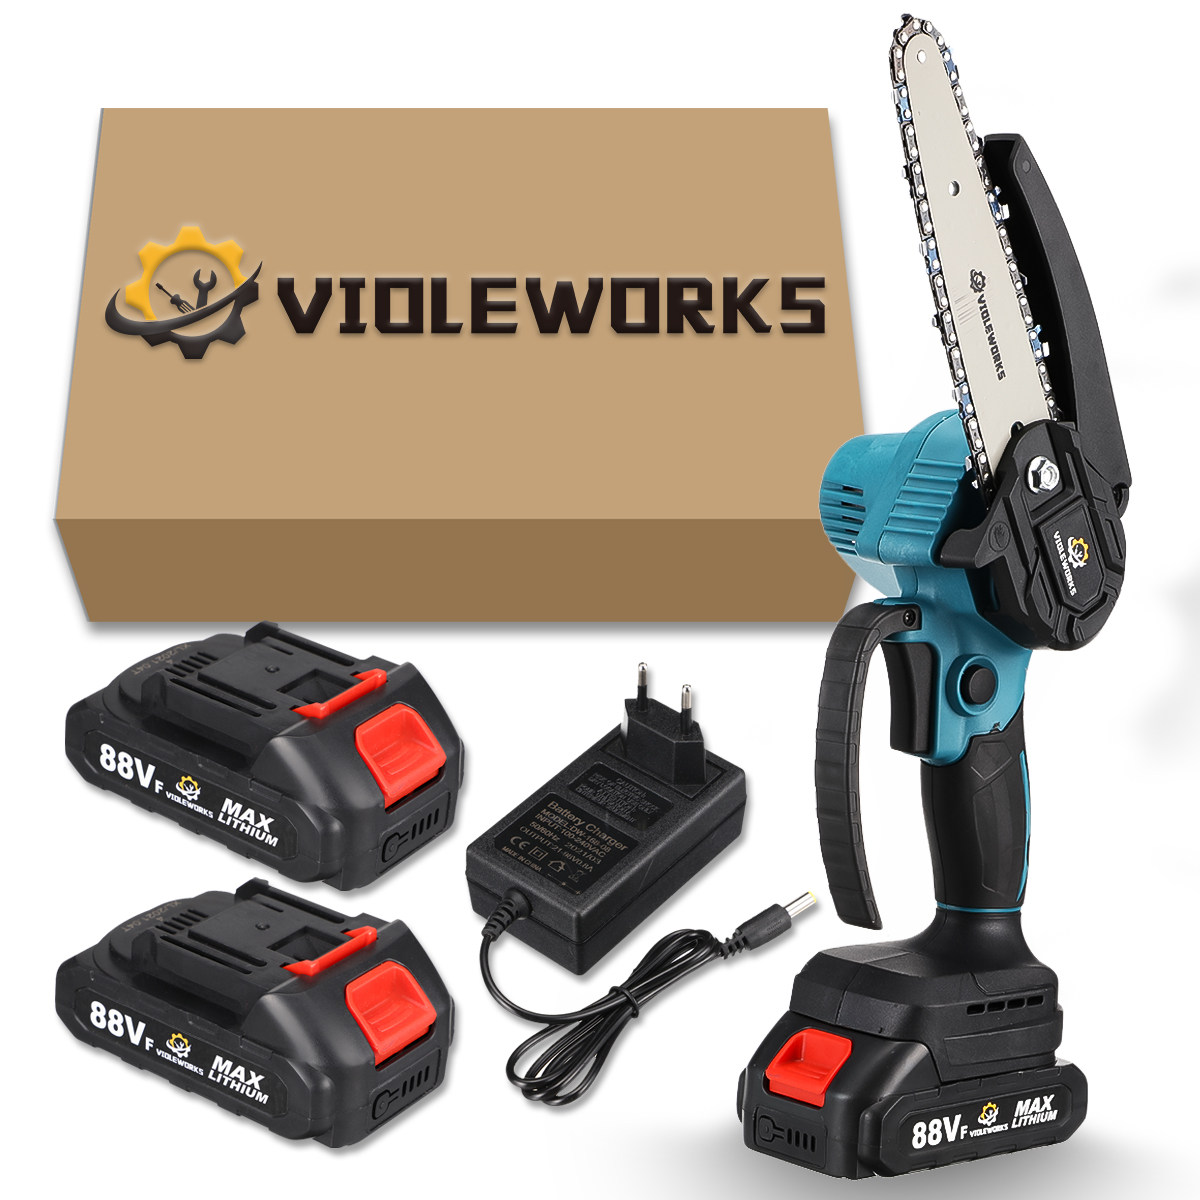 VIOLEWORKS-88VF-6-Inch-Electric-Chain-Saw-1500W-Cordless-One-Hand-Saws-Woodworking-Tool-Wood-Cutter--1862023-10